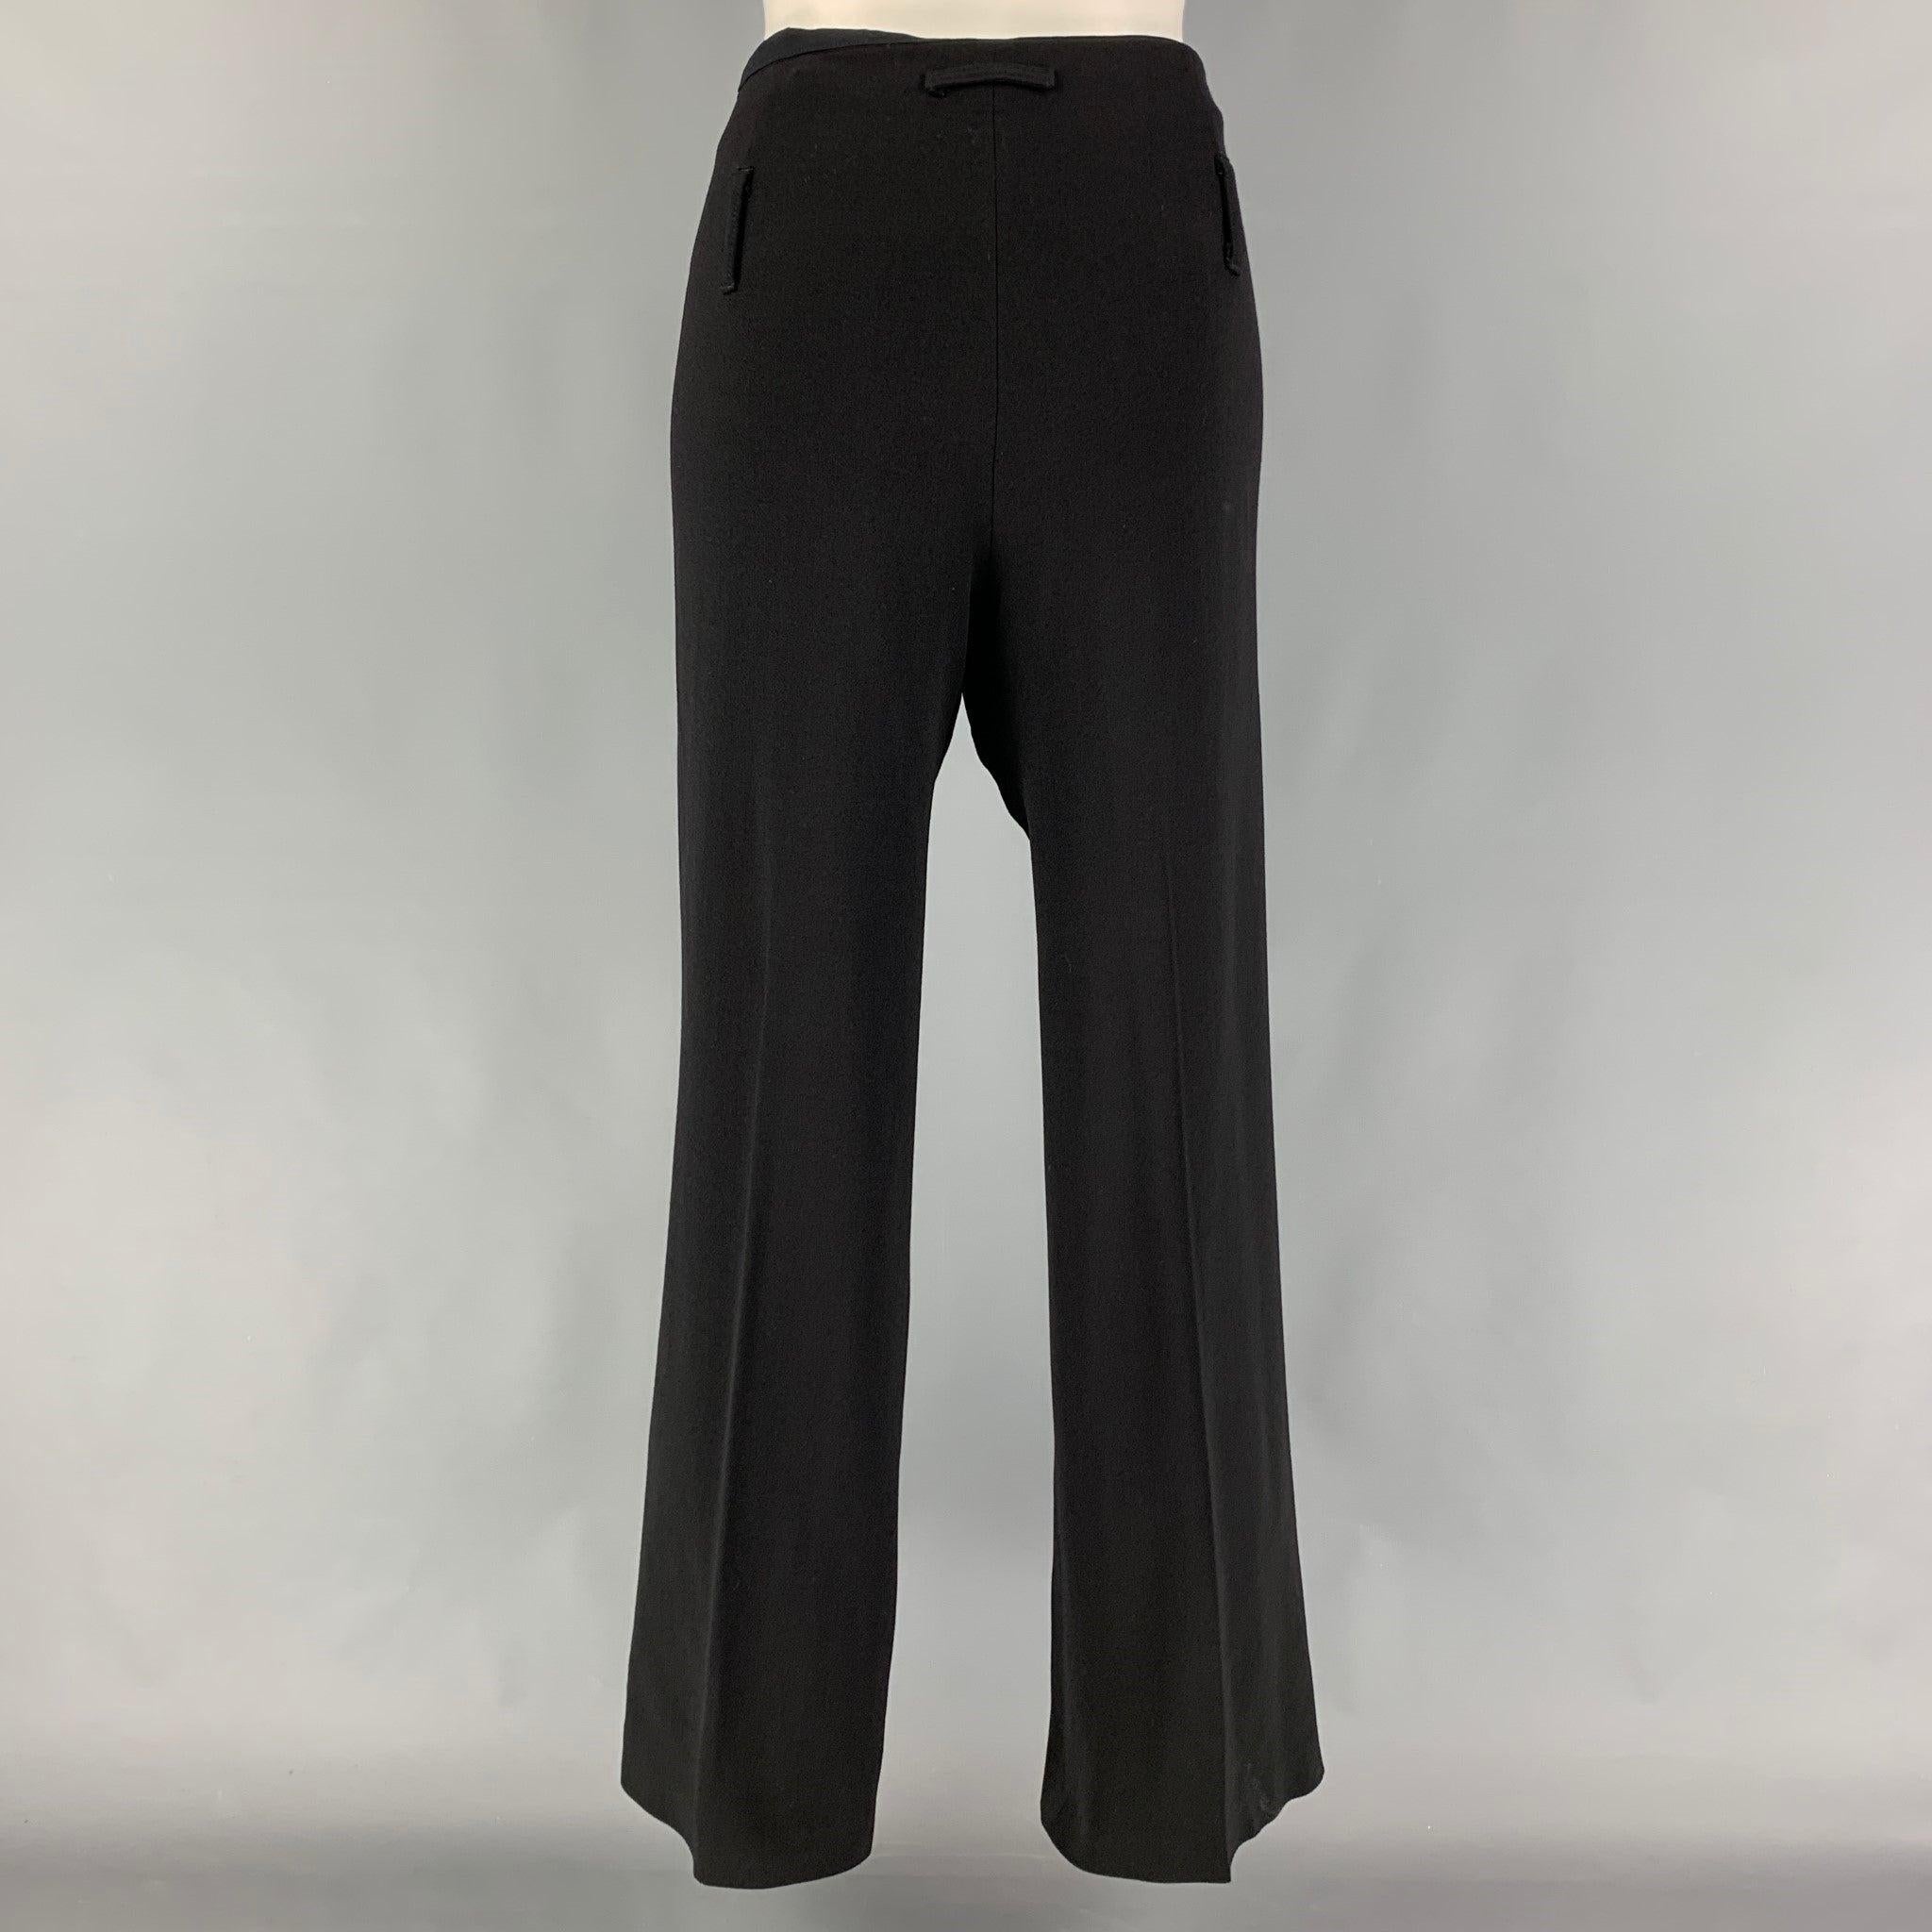 JEAN PAUL GAULTIER Size 8 Black Wool Polyamide Dress Pants In Good Condition For Sale In San Francisco, CA